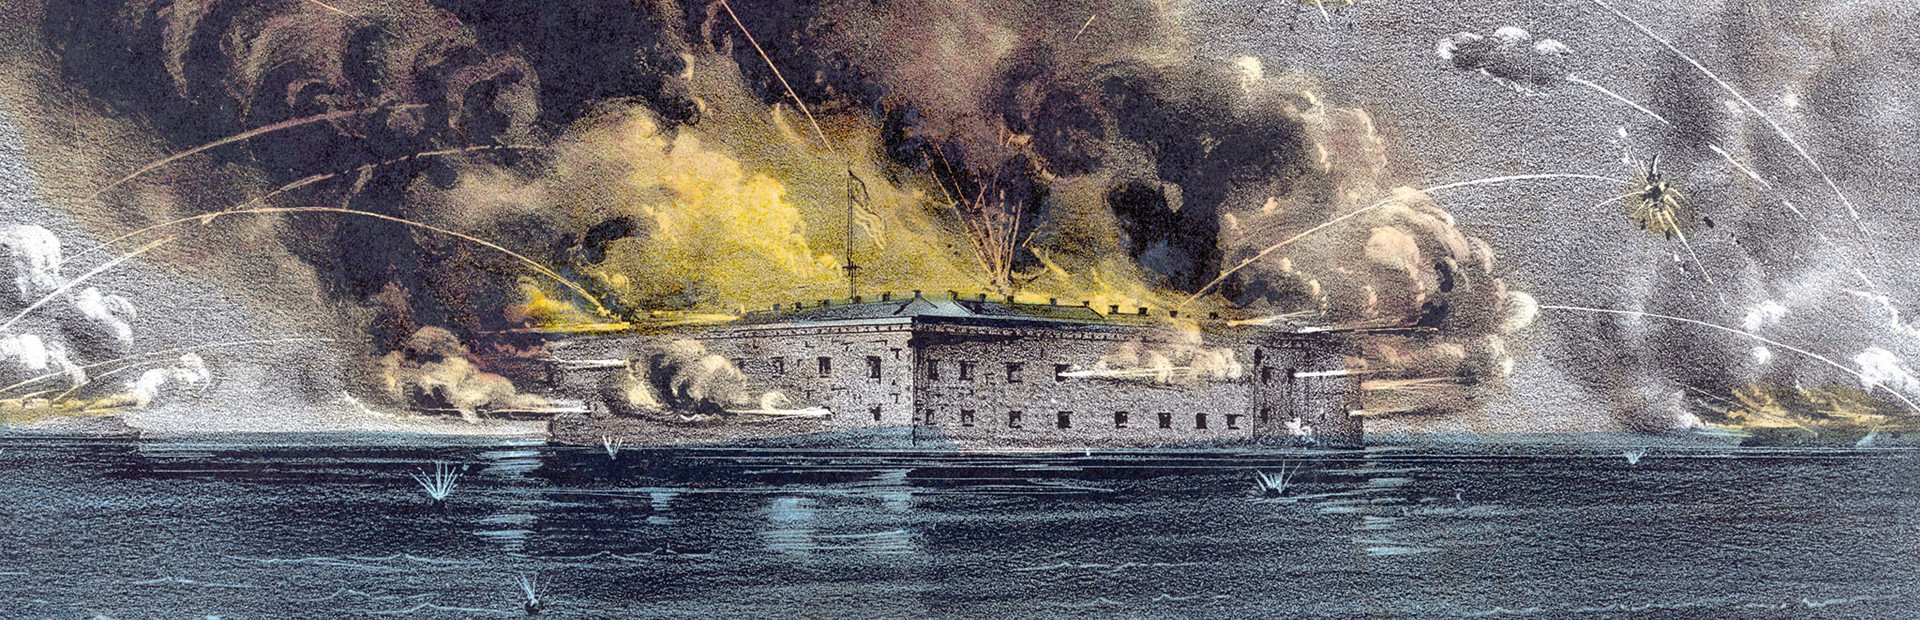 Fort Sumter: The Secession Crisis cover image